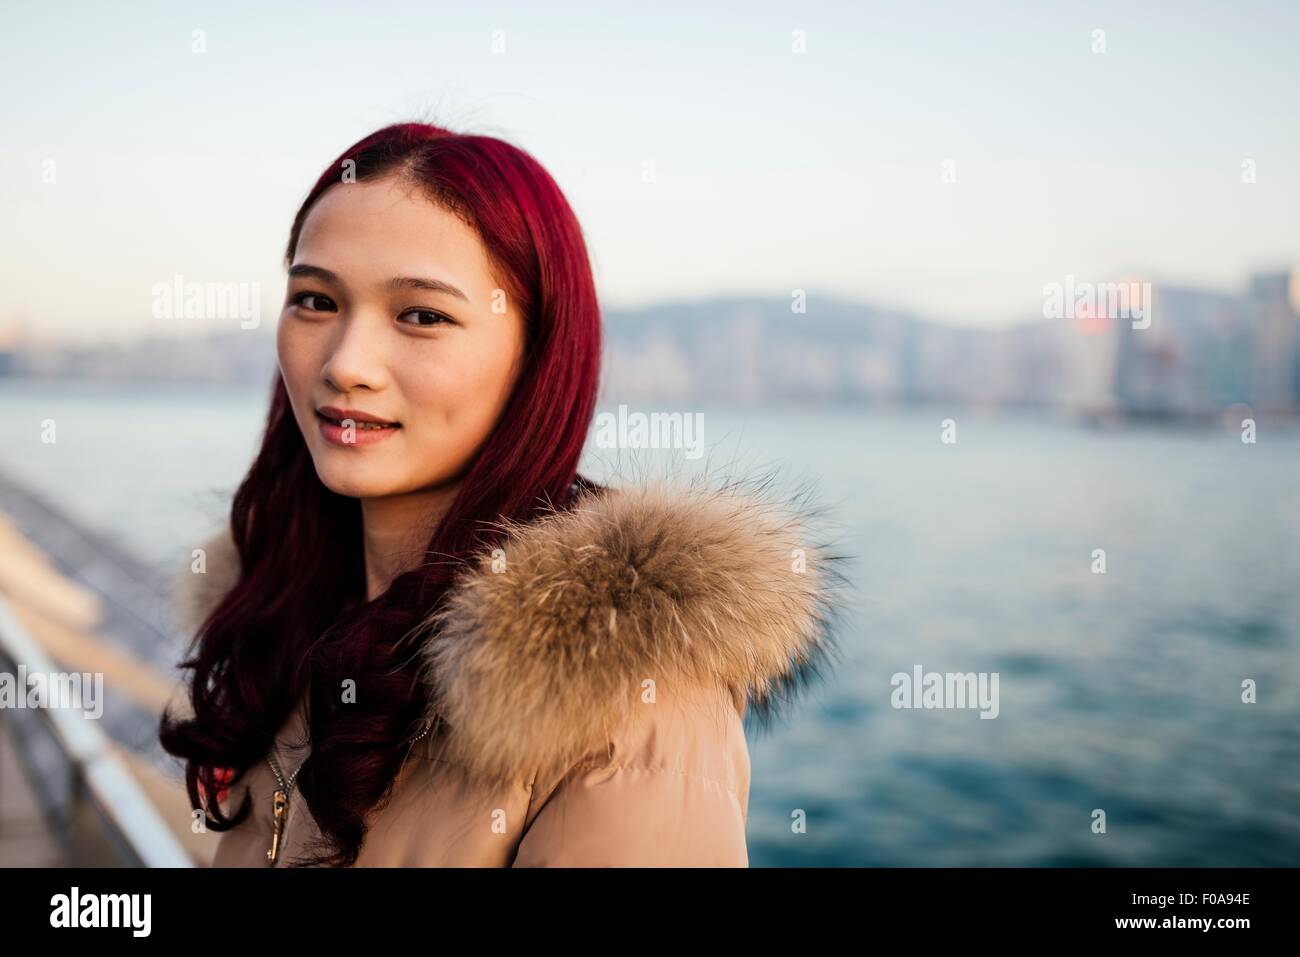 Portrait of young woman wearing fur trim coat with dyed red hair in front of water Stock Photo